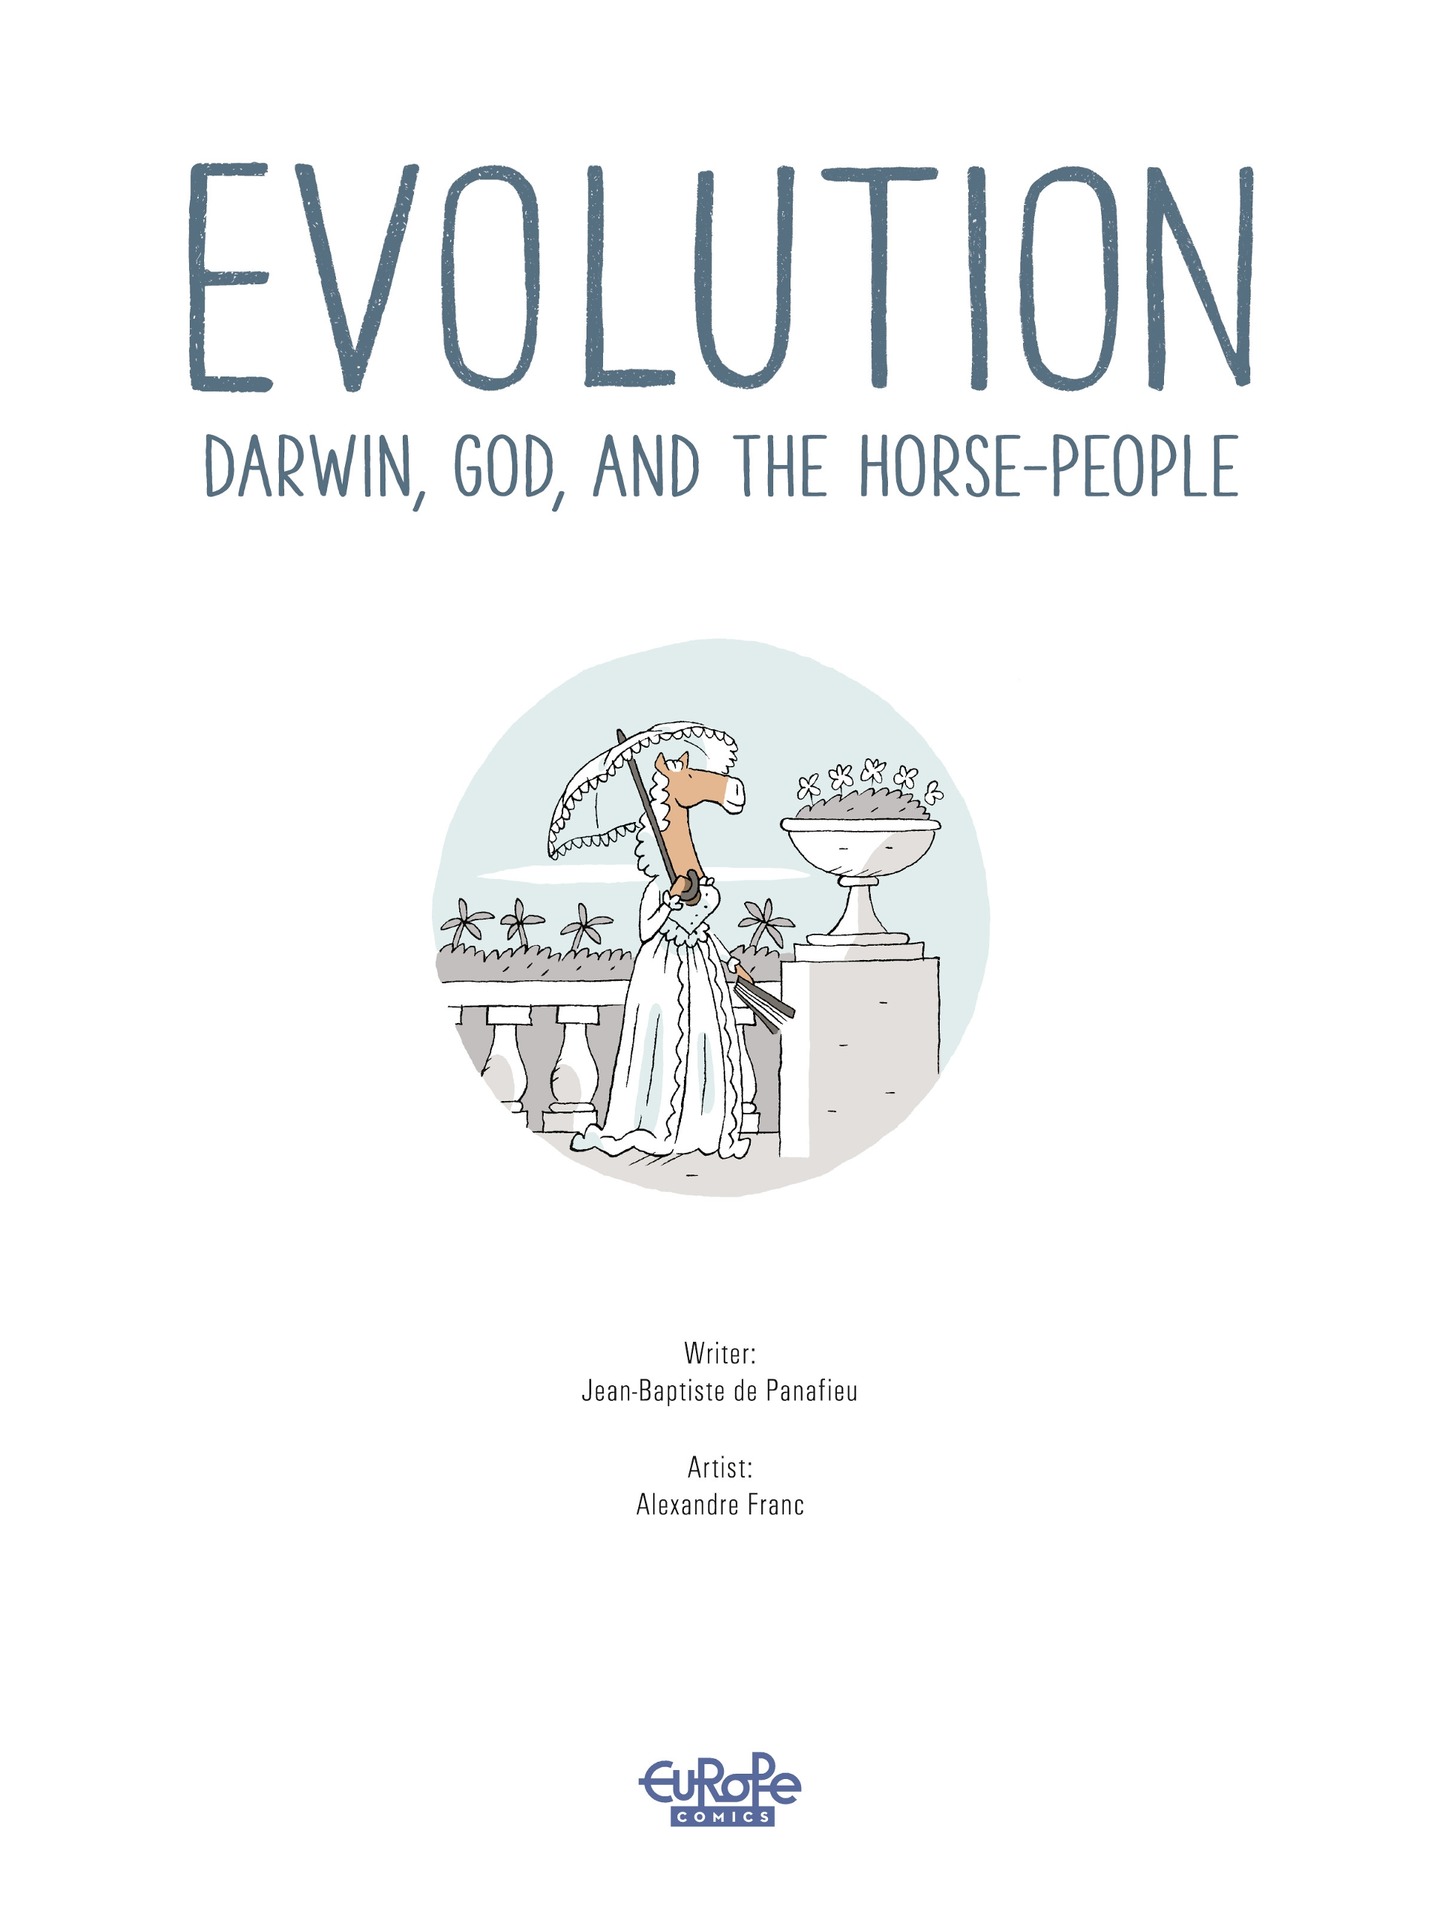 Read online Evolution, Darwin, God, and the Horse-People comic -  Issue # TPB - 3